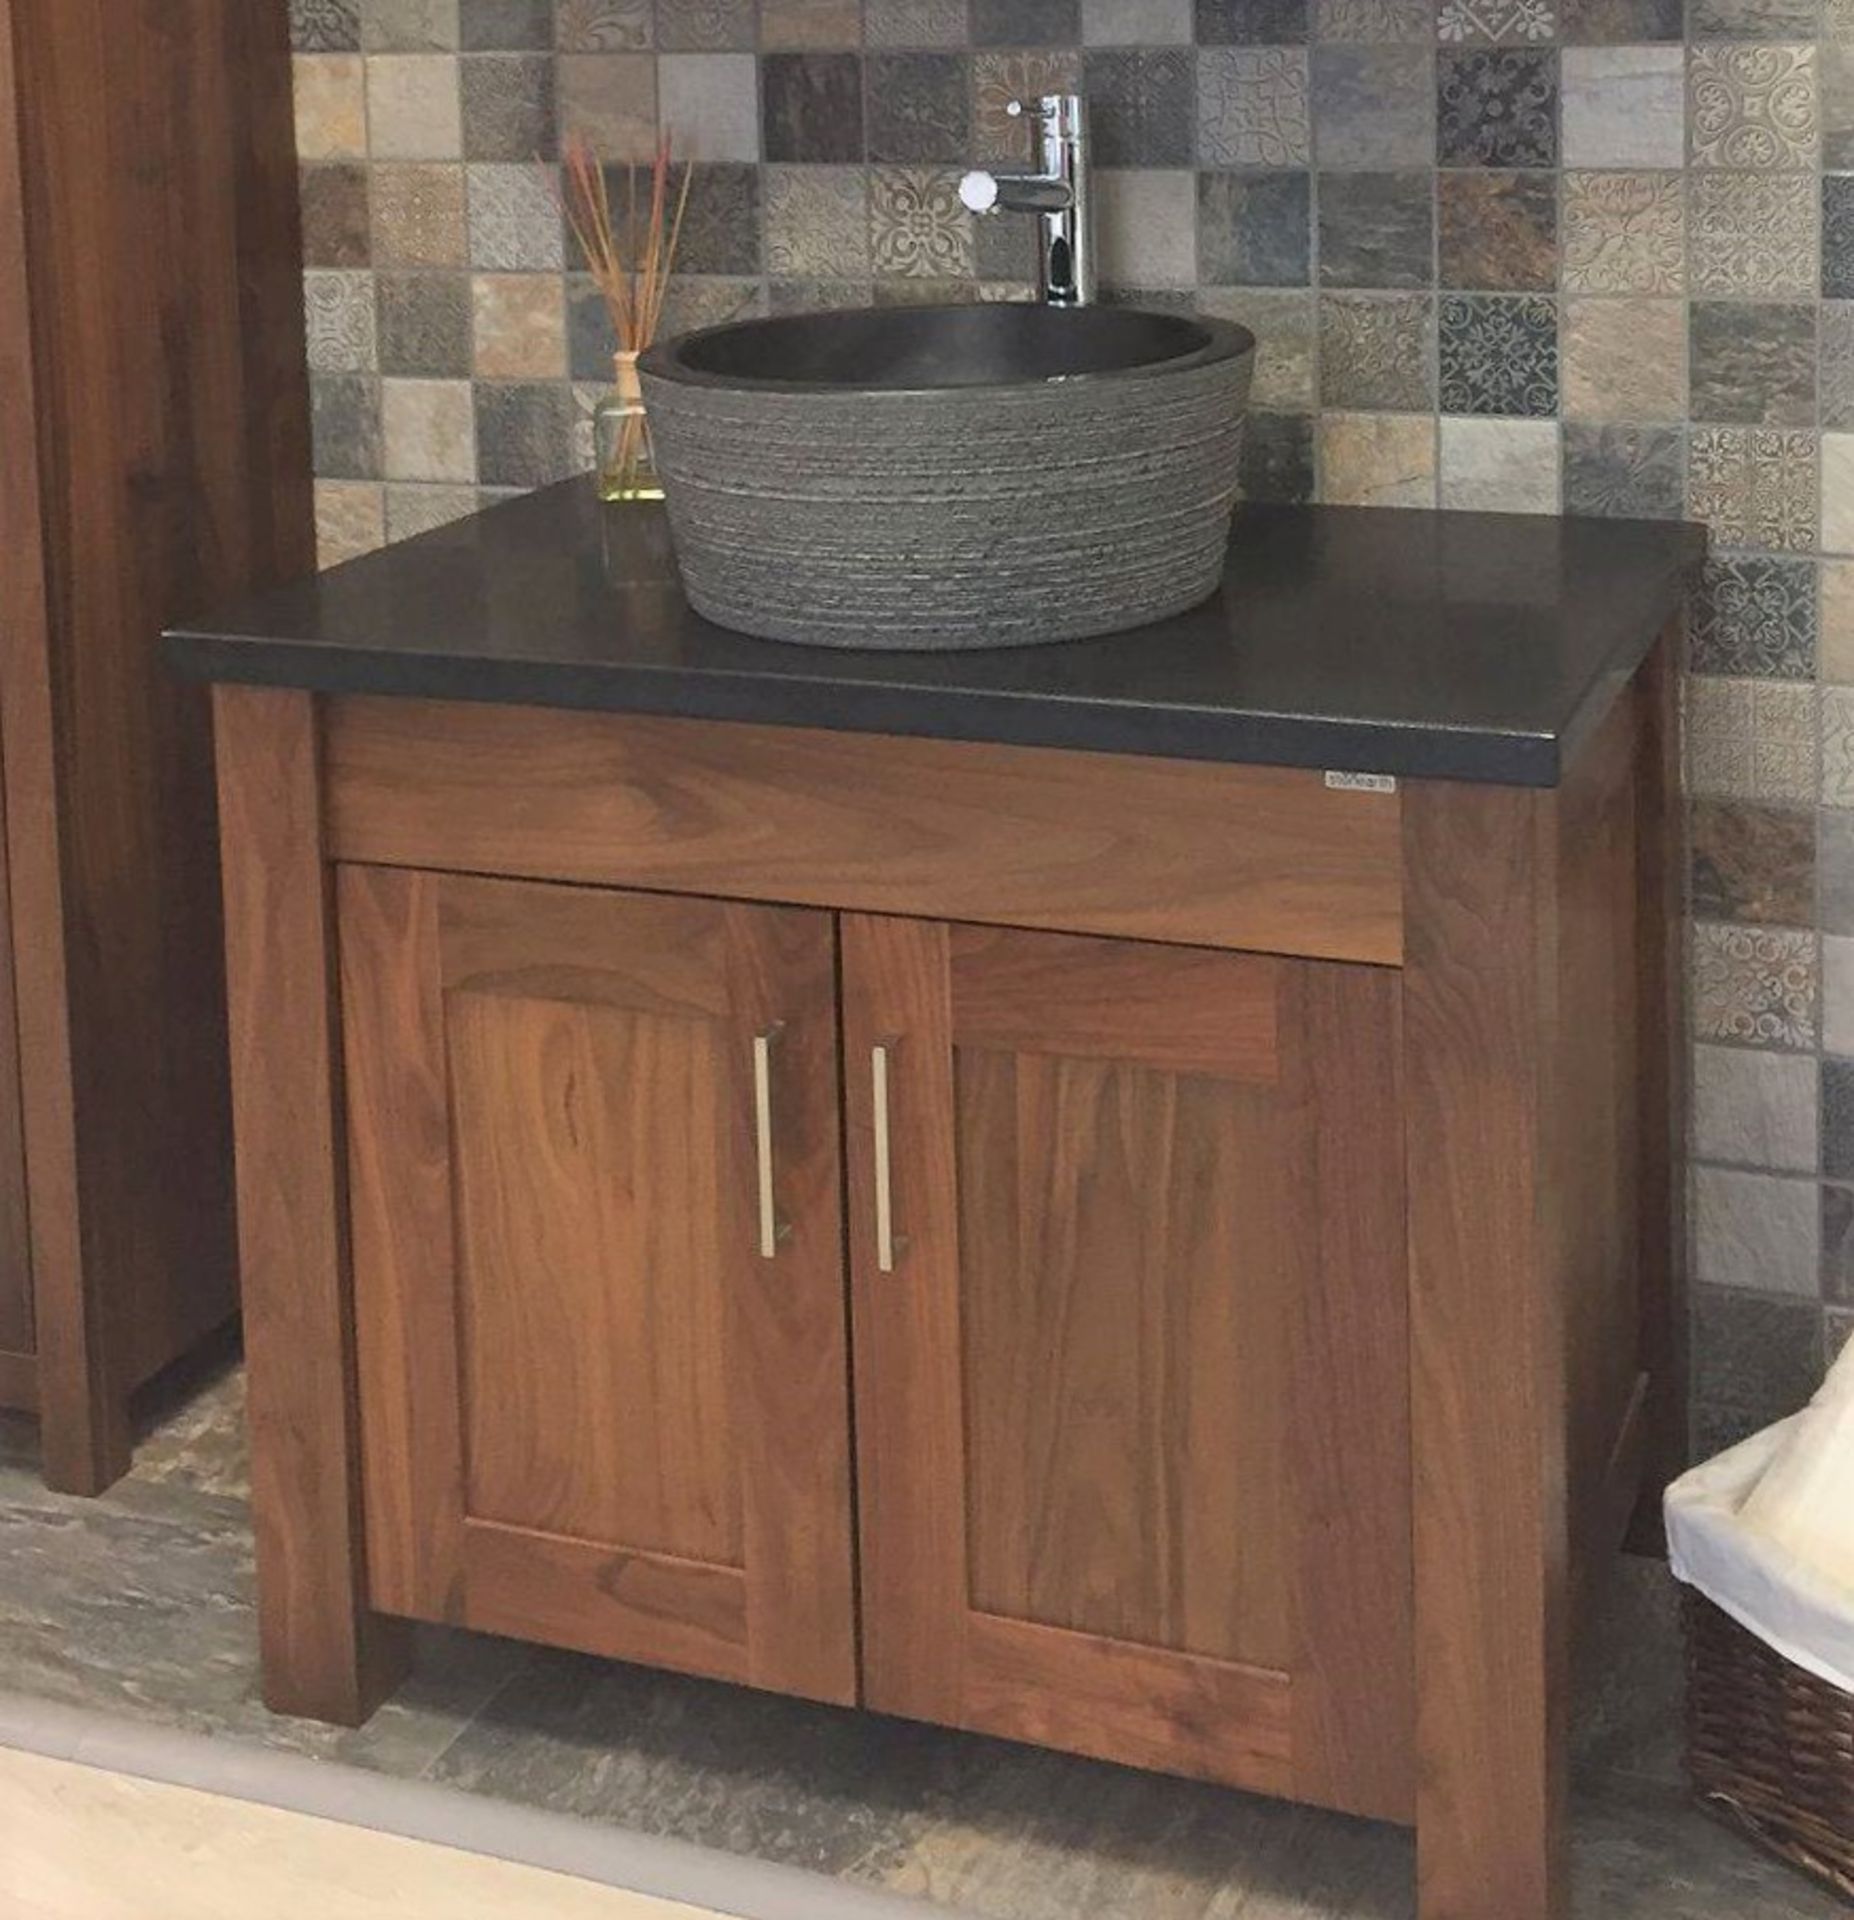 1 x Stonearth 'Finesse' Countertop Washstand - American Solid Walnut - Original RRP £1,400 - Image 8 of 10